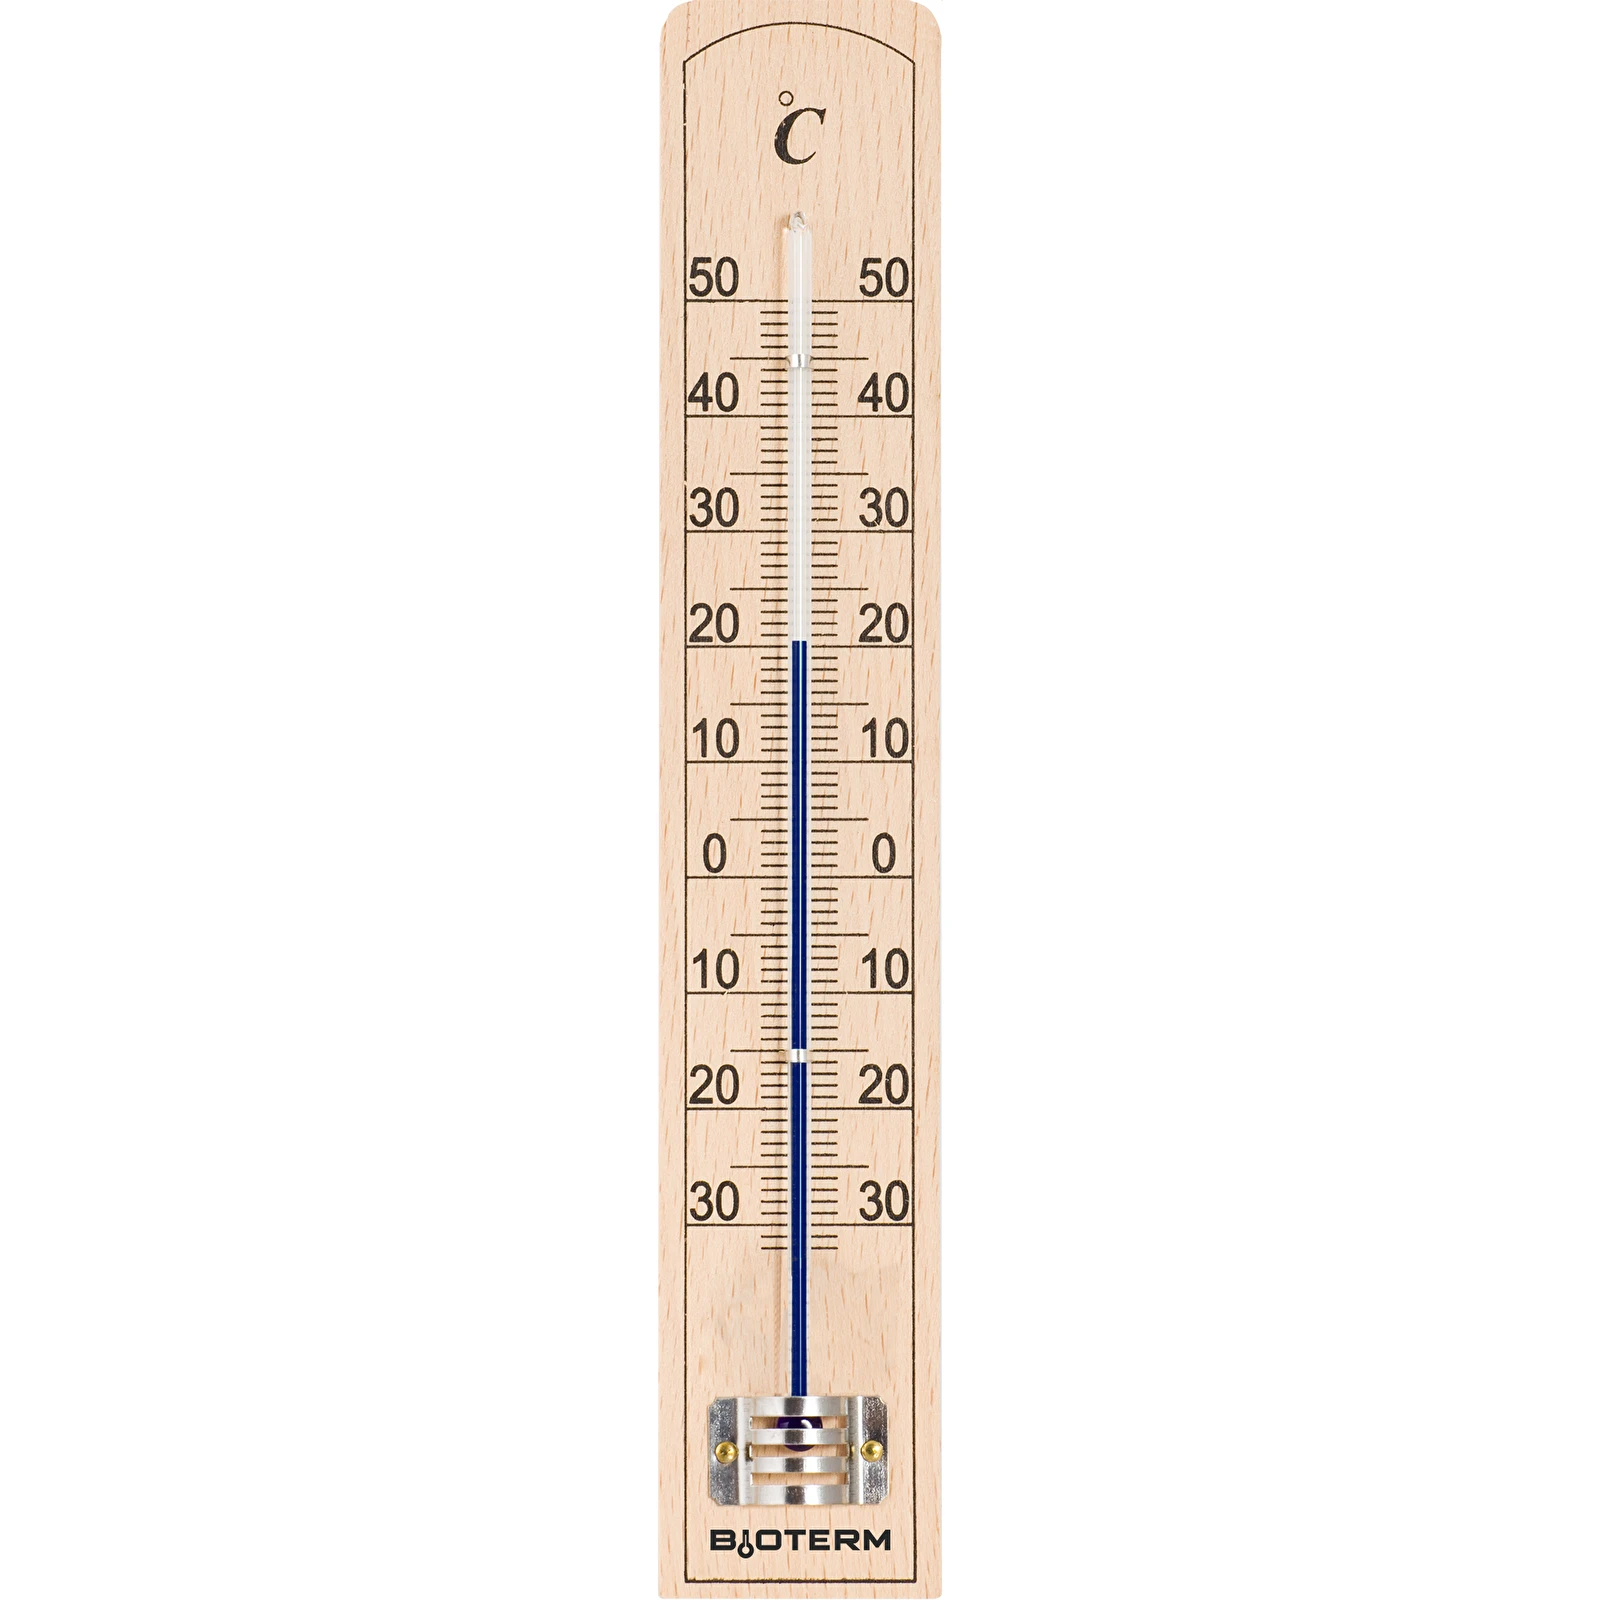 https://browin.com/static/images/1600/a-room-thermometer-with-reinforced-capillary-protection-30-c-to-50-c-20cm-012300_.webp